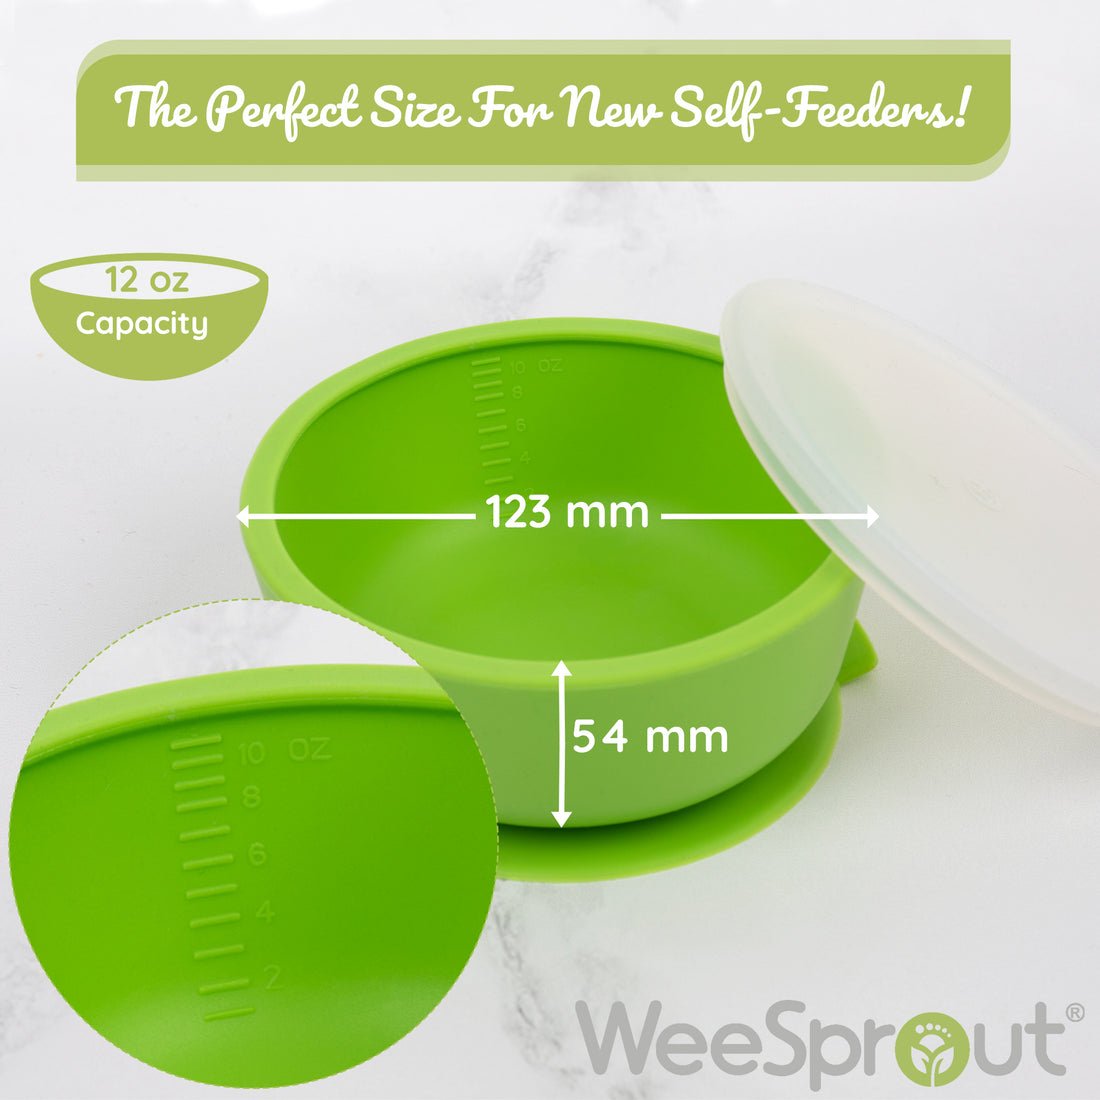 Kitchen + Home Smart Sprout Baby Bowls - FDA Approved Stay Put Suction  Bowls Set with Snap Tight Lids (SC-161)